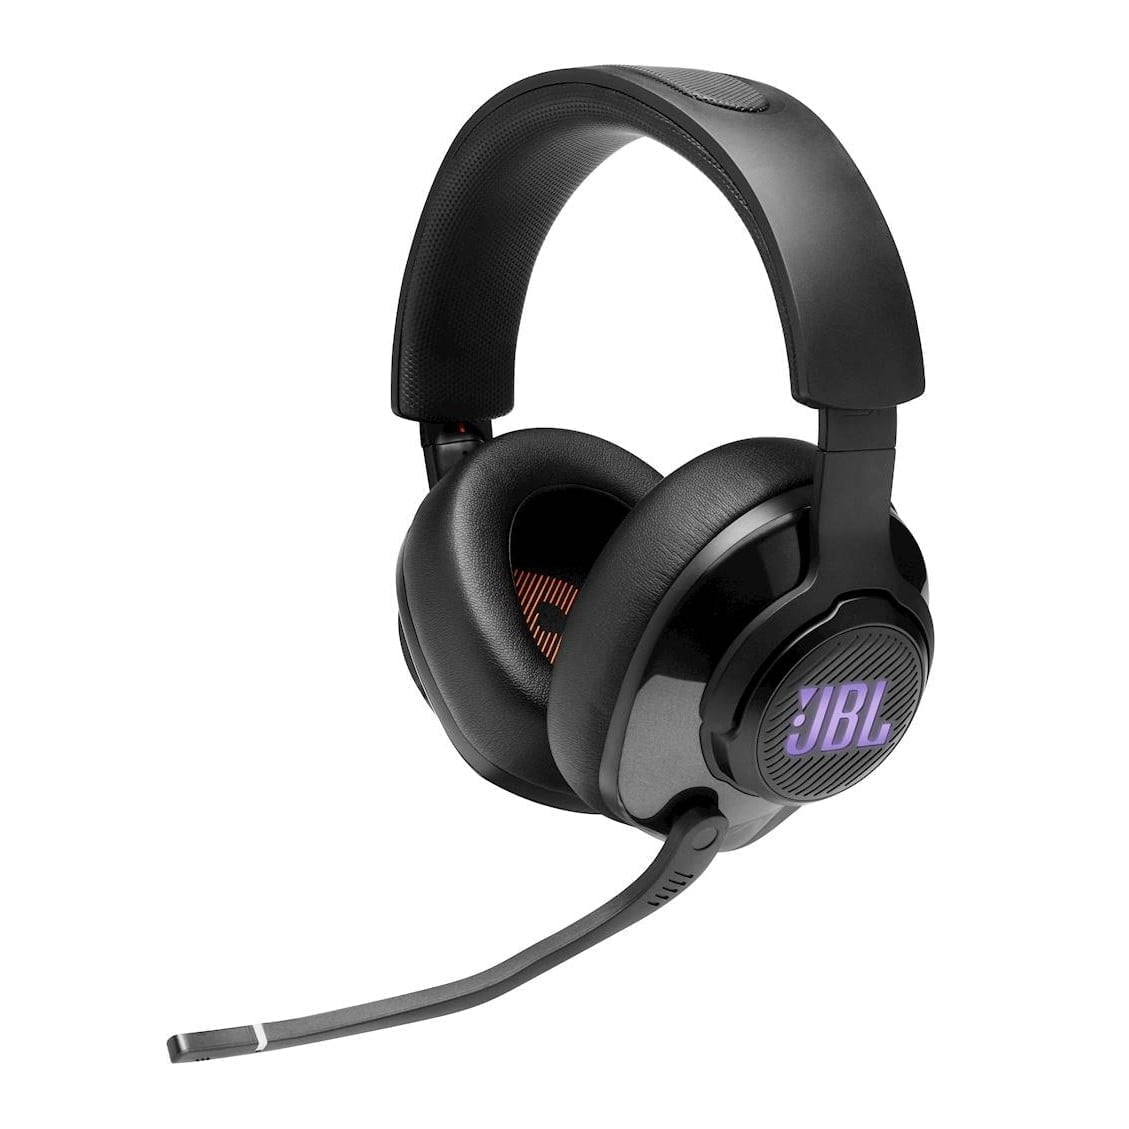 6408569Ld Jbl &Lt;H1 Class=&Quot;Headline&Quot; Data-Productname=&Quot;Jbl Quantum 400&Quot; Data-Gtm-Vis-Has-Fired-7462060_677=&Quot;1&Quot; Data-Gtm-Vis-Has-Fired-7462060_678=&Quot;1&Quot;&Gt;Jbl Quantum 400 Usb Over-Ear Pc Gaming Headset With Game-Chat Dial&Lt;/H1&Gt; Https://Www.youtube.com/Watch?V=5-Exosfwfhe Experience High-Quality Acoustics With This Jbl Quantum 400 Over-Ear Wired Gaming Headset. The Voice Focus Boom Microphone Enables Clear Communication, While The Memory Foam Ear Cushions Keep You Comfortable During Extended Gaming Sessions. This Jbl Quantum 400 Over-Ear Wired Gaming Headset Features Multiplatform Compatibility For Flexibility And Quantumsound Signature Technology To Enhance Audio Clarity. Jbl Quantum Jbl Quantum 400 Usb Over-Ear Pc Gaming Headset With Game-Chat Dial